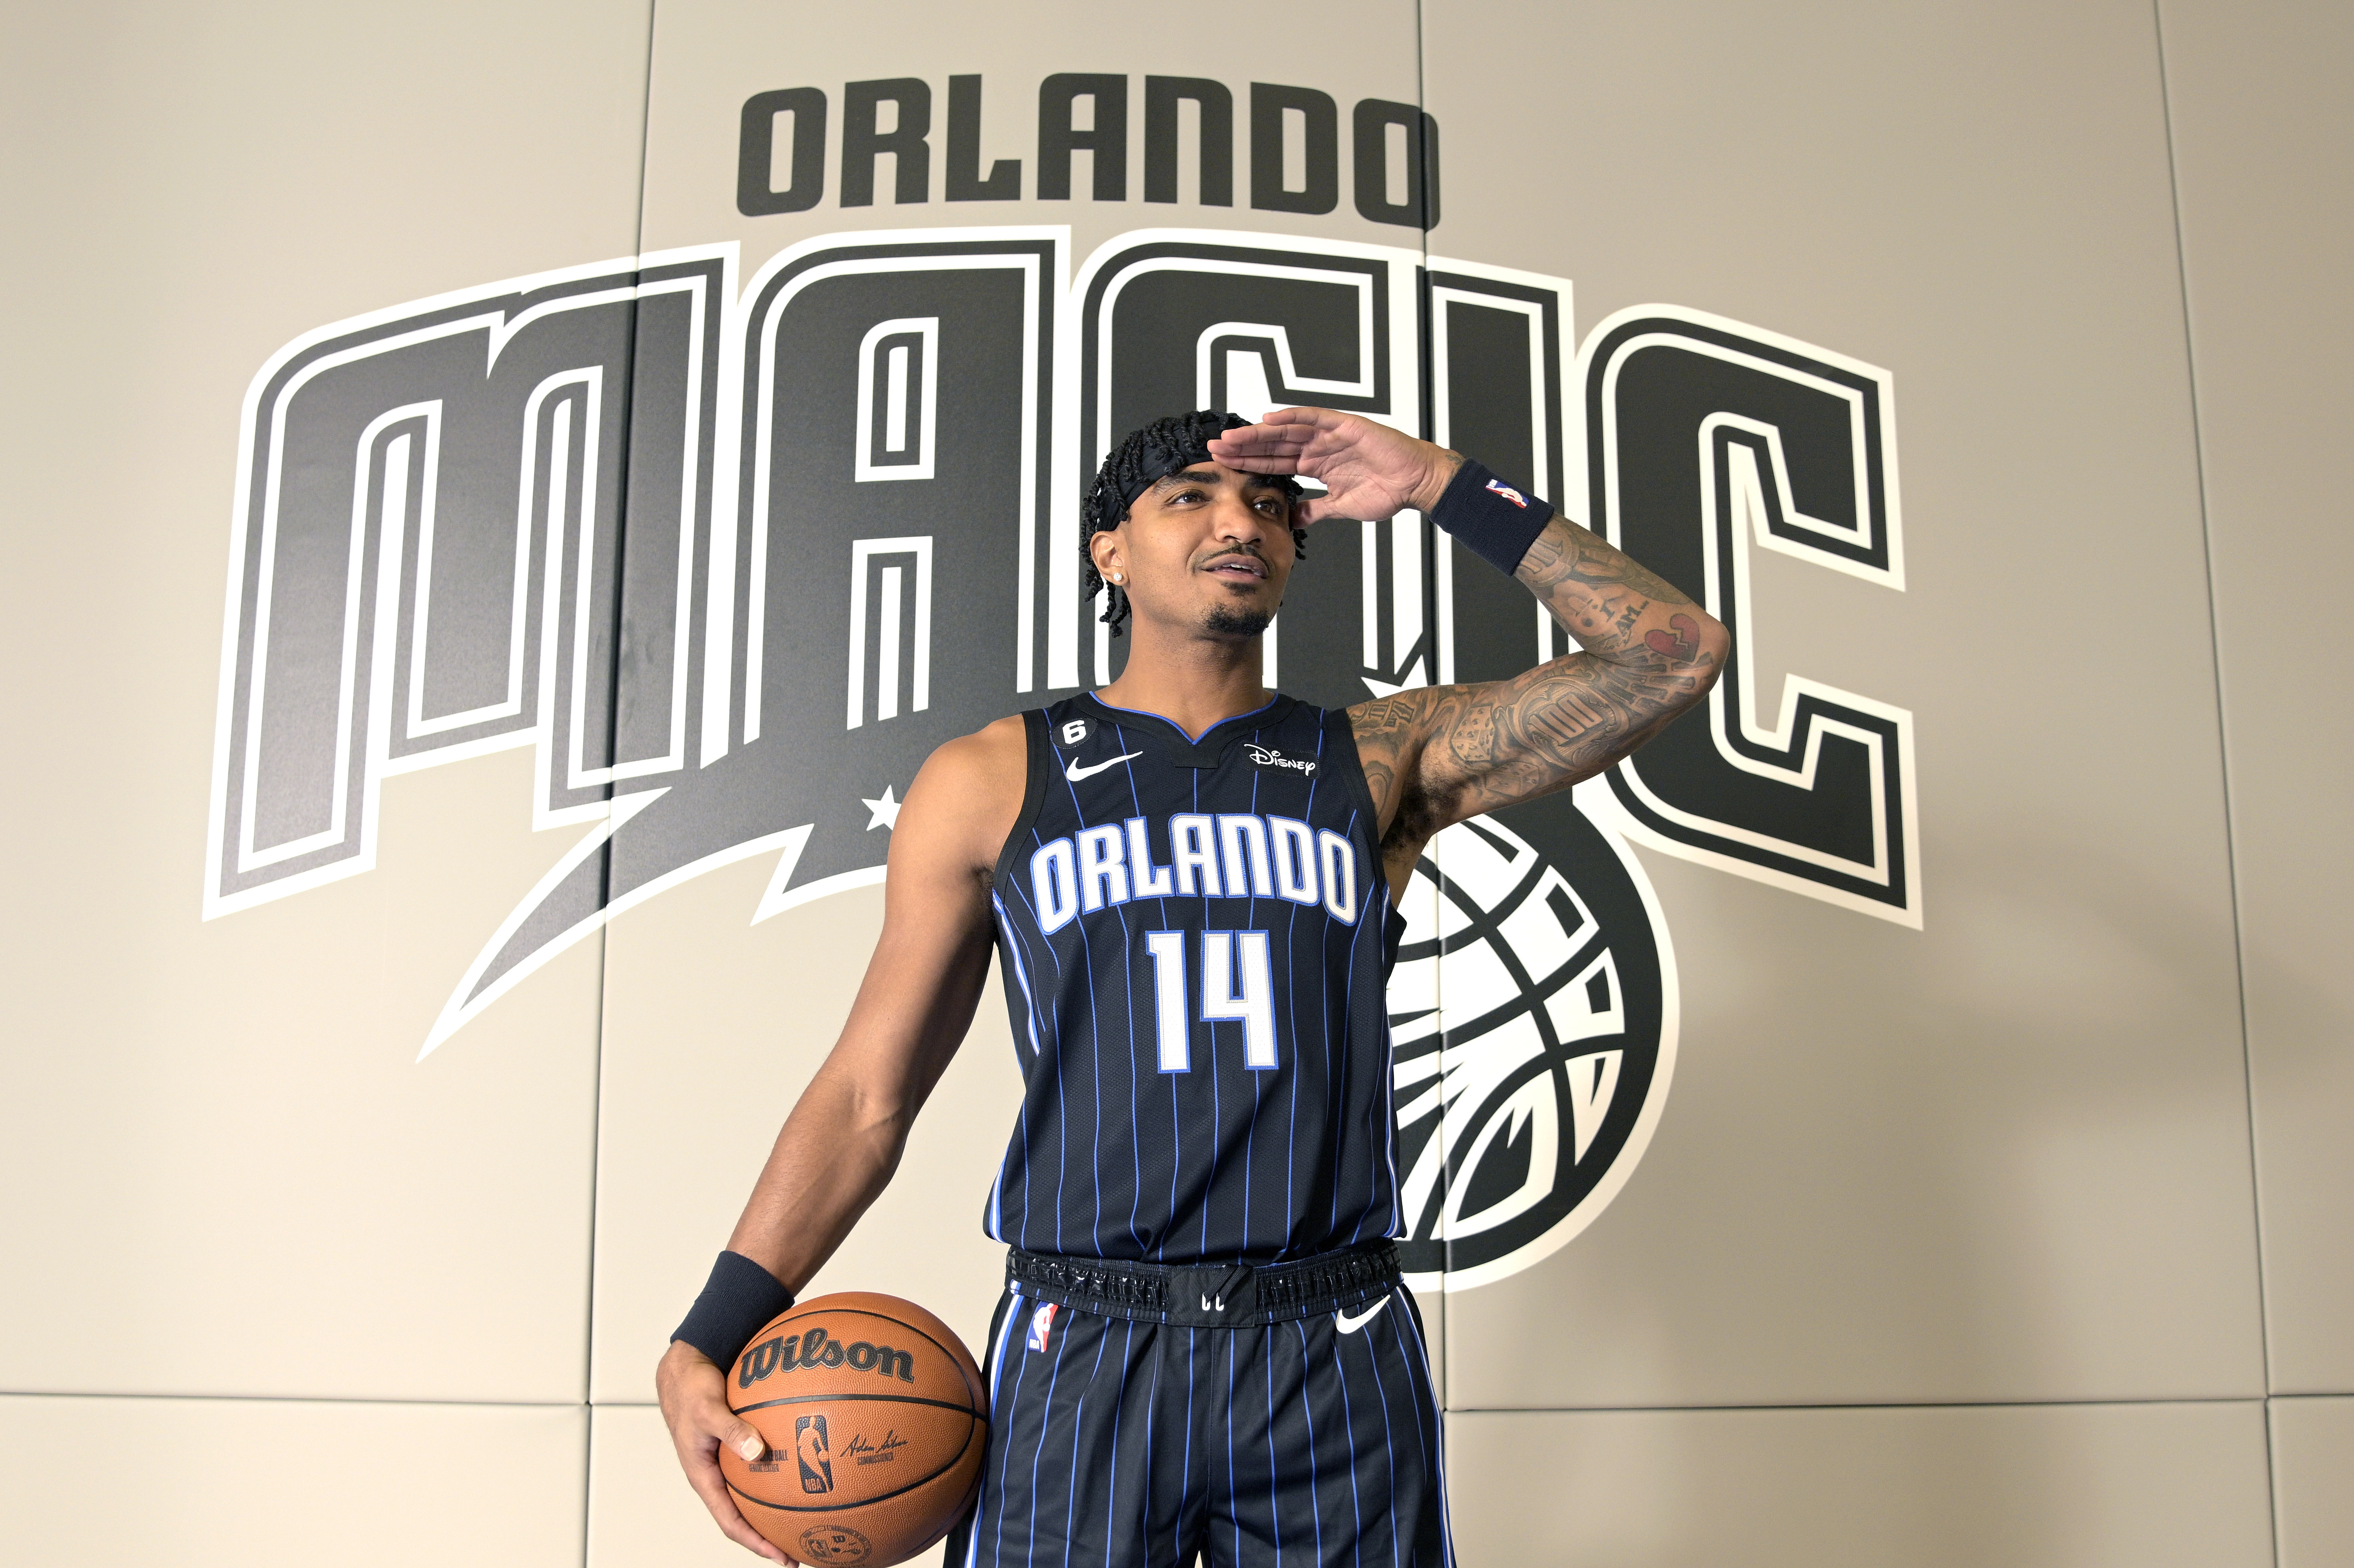 Orlando Magic on Instagram: “Suiting up in the Icon tonight!”